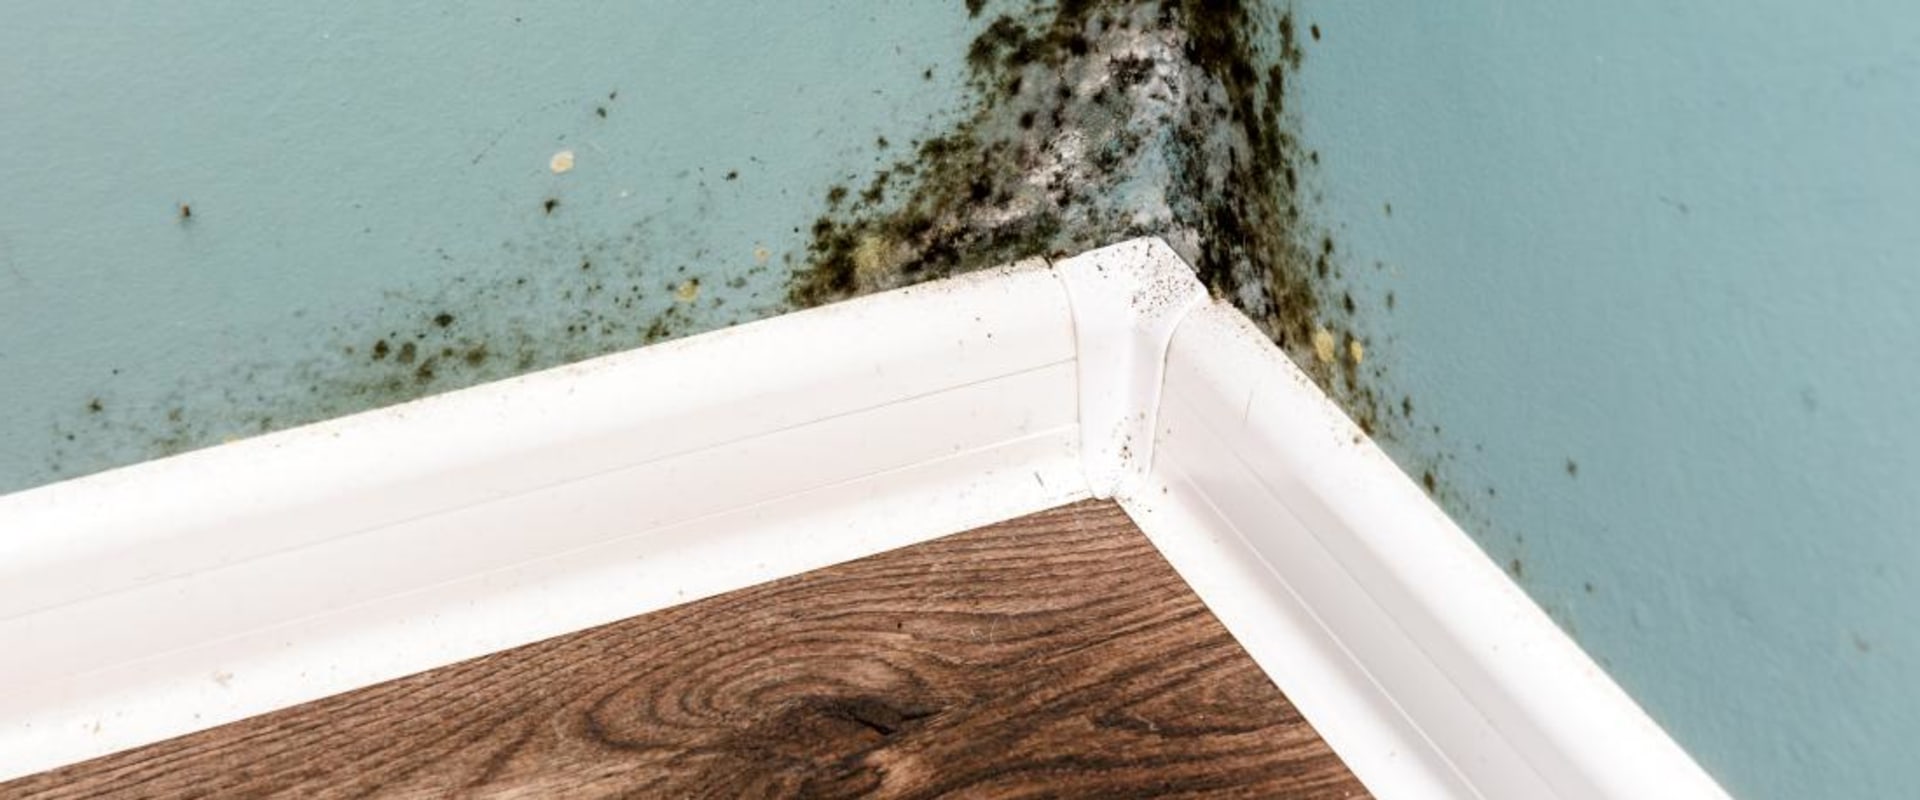 How to Get Rid of Mold and Stop it from Coming Back